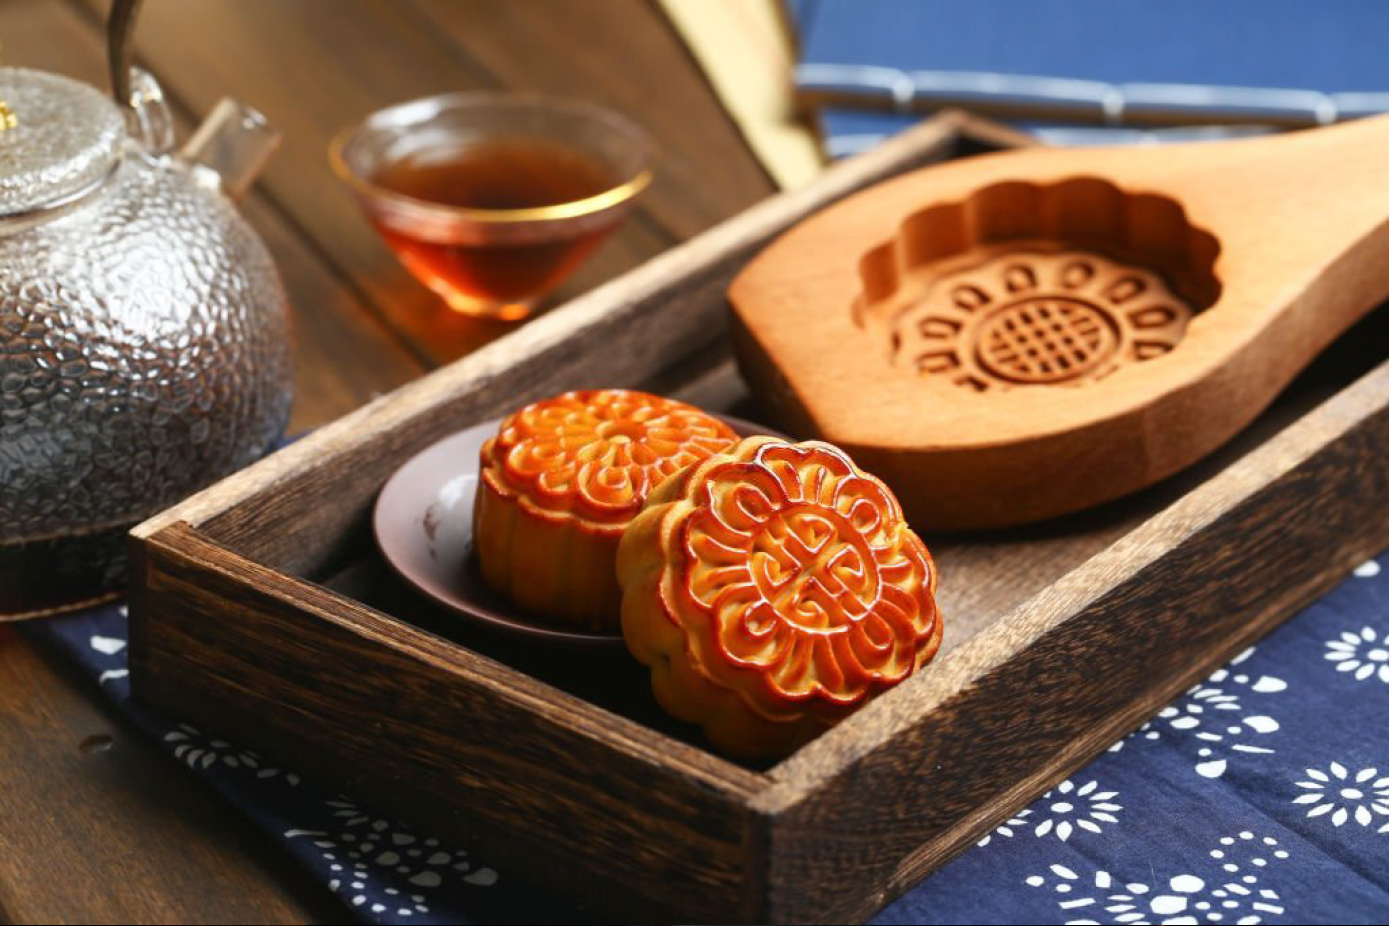 a table with a tray with 2 mooncakes, a mooncake mold and a teapot with a cup of tea on the side